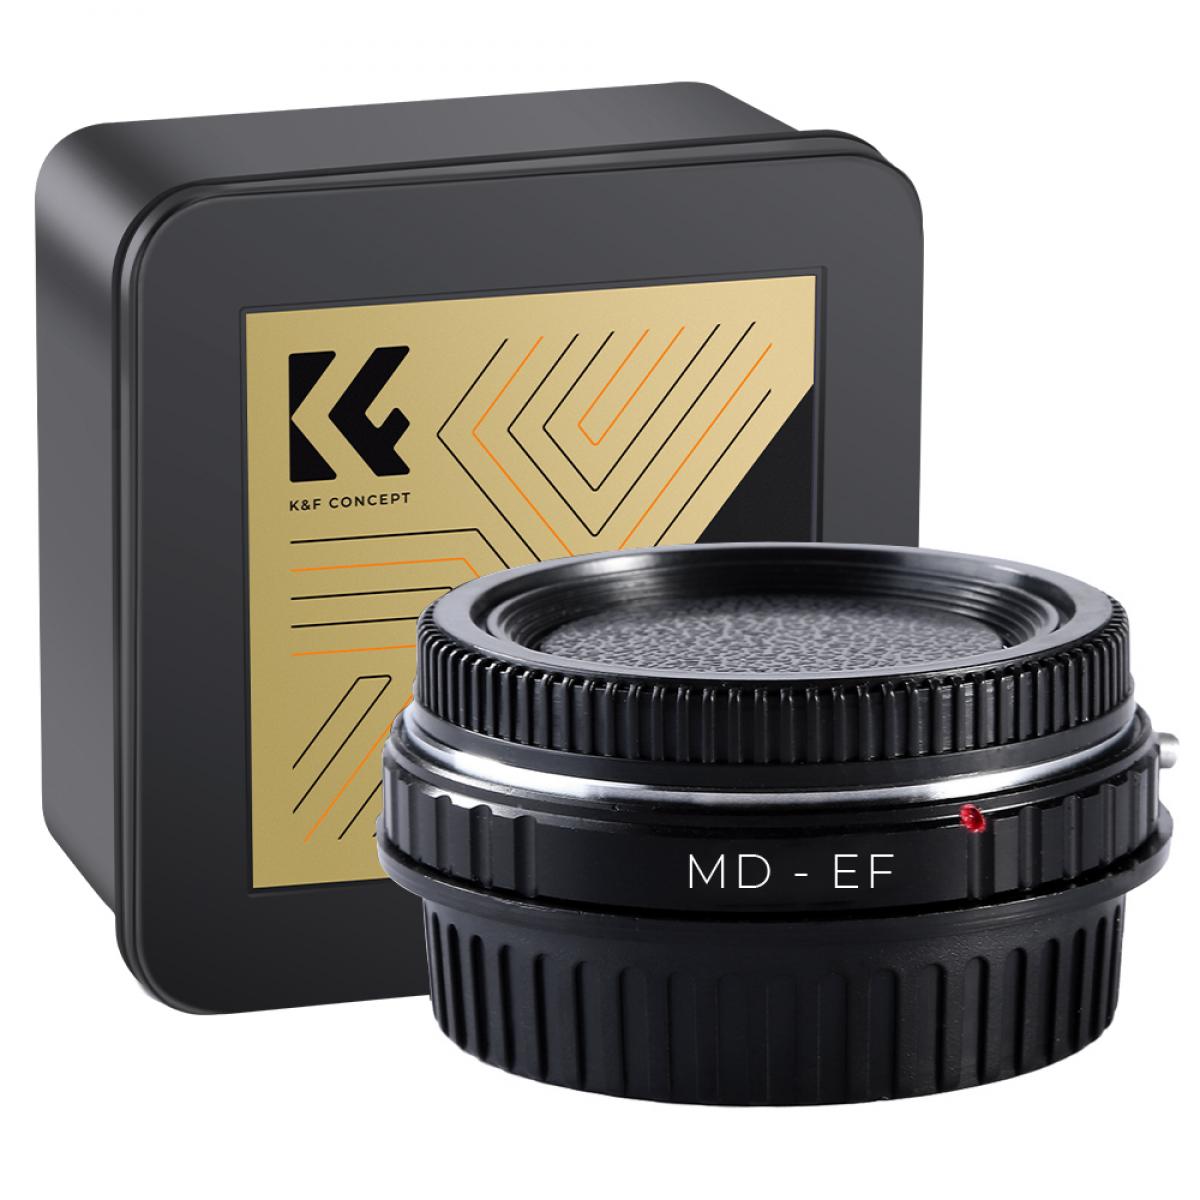 Minolta MD MC Lenses to Canon EF Lens Mount Adapter with Optic Glass K&F Concept M12131 Lens Adapter